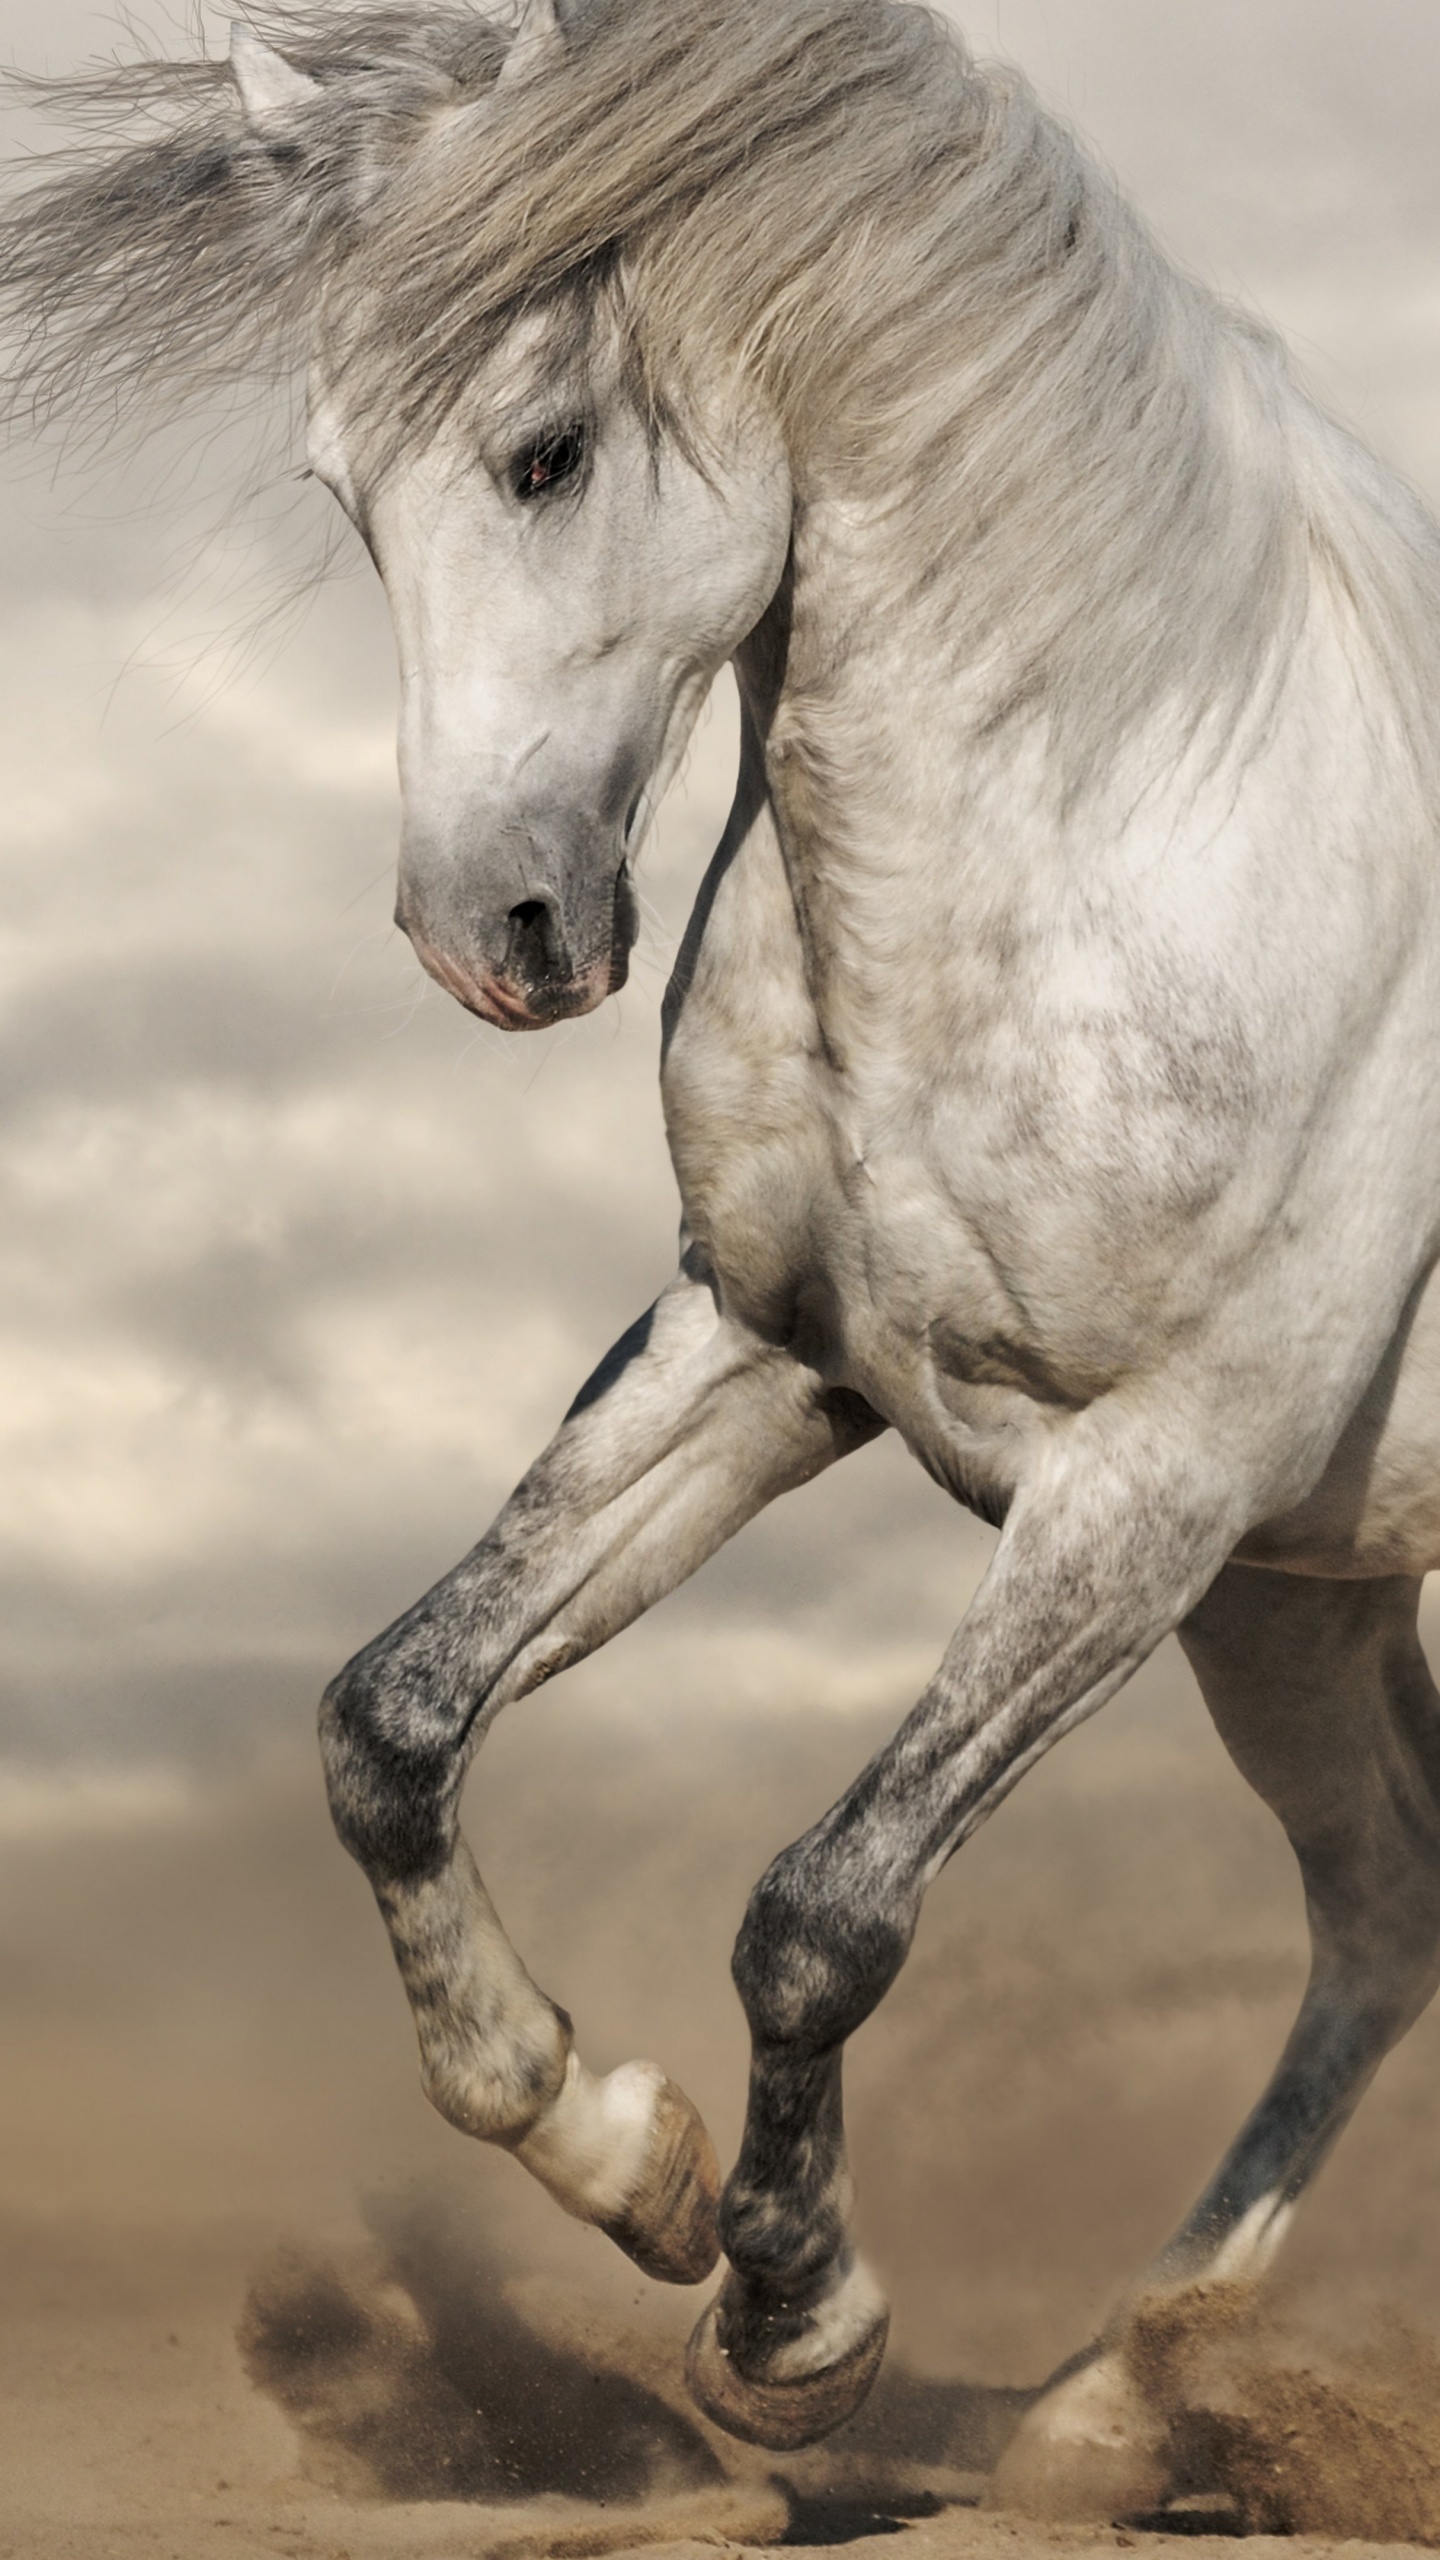 White Horse Running on Brown Sand During Daytime. Wallpaper in 1440x2560 Resolution